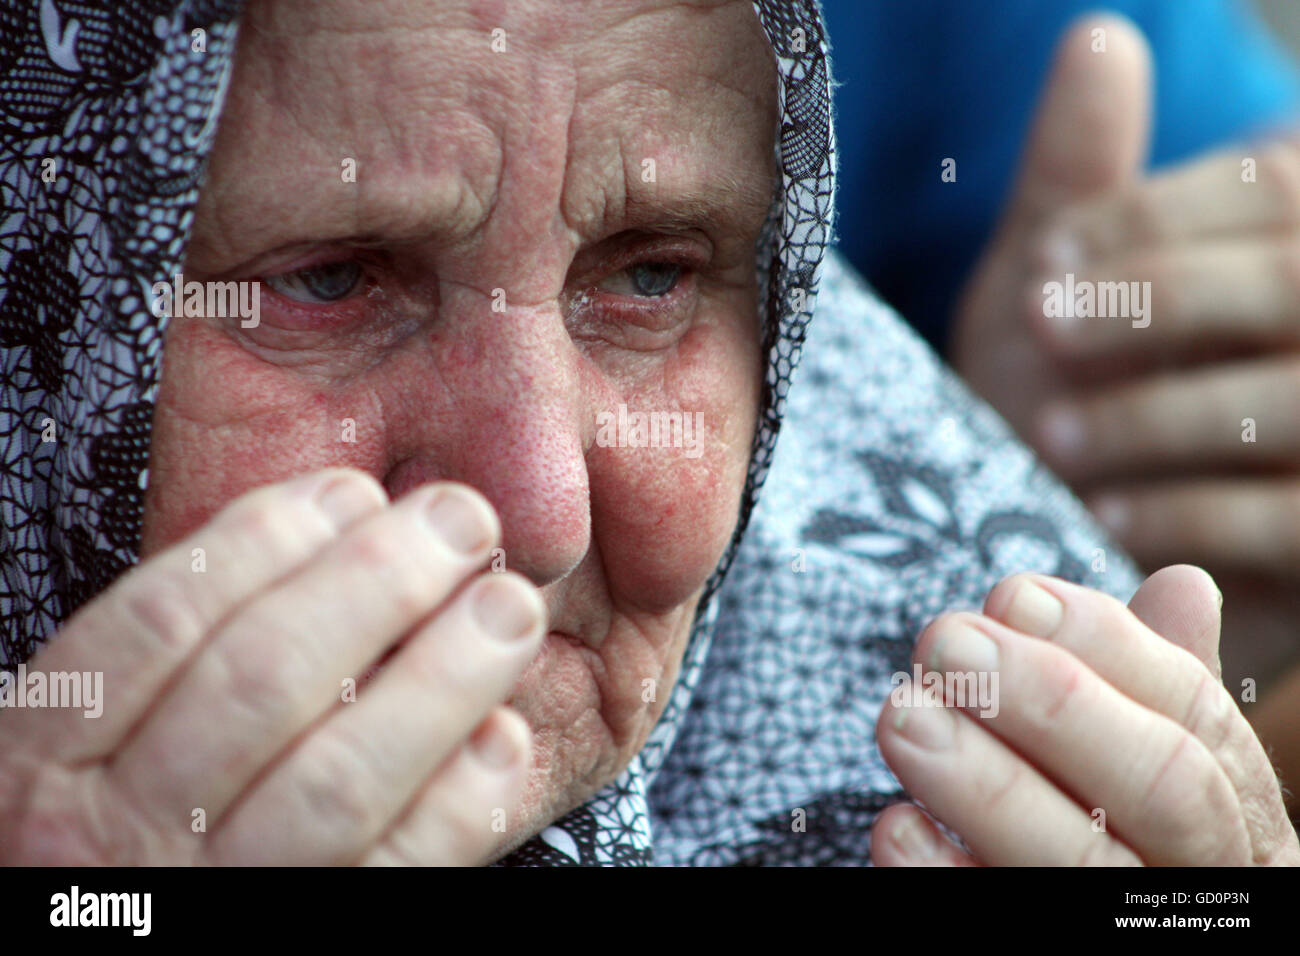 Potocari, Bosna i Hercegovina. 10th July, 2016. Women is seen praying next to the coffin of her relative. During the 1992-95 war, 8,000 Muslim men and boys were executed by Bosnian Serb forces over five July days. © Armin Durgut/ZUMA Wire/Alamy Live News Stock Photo